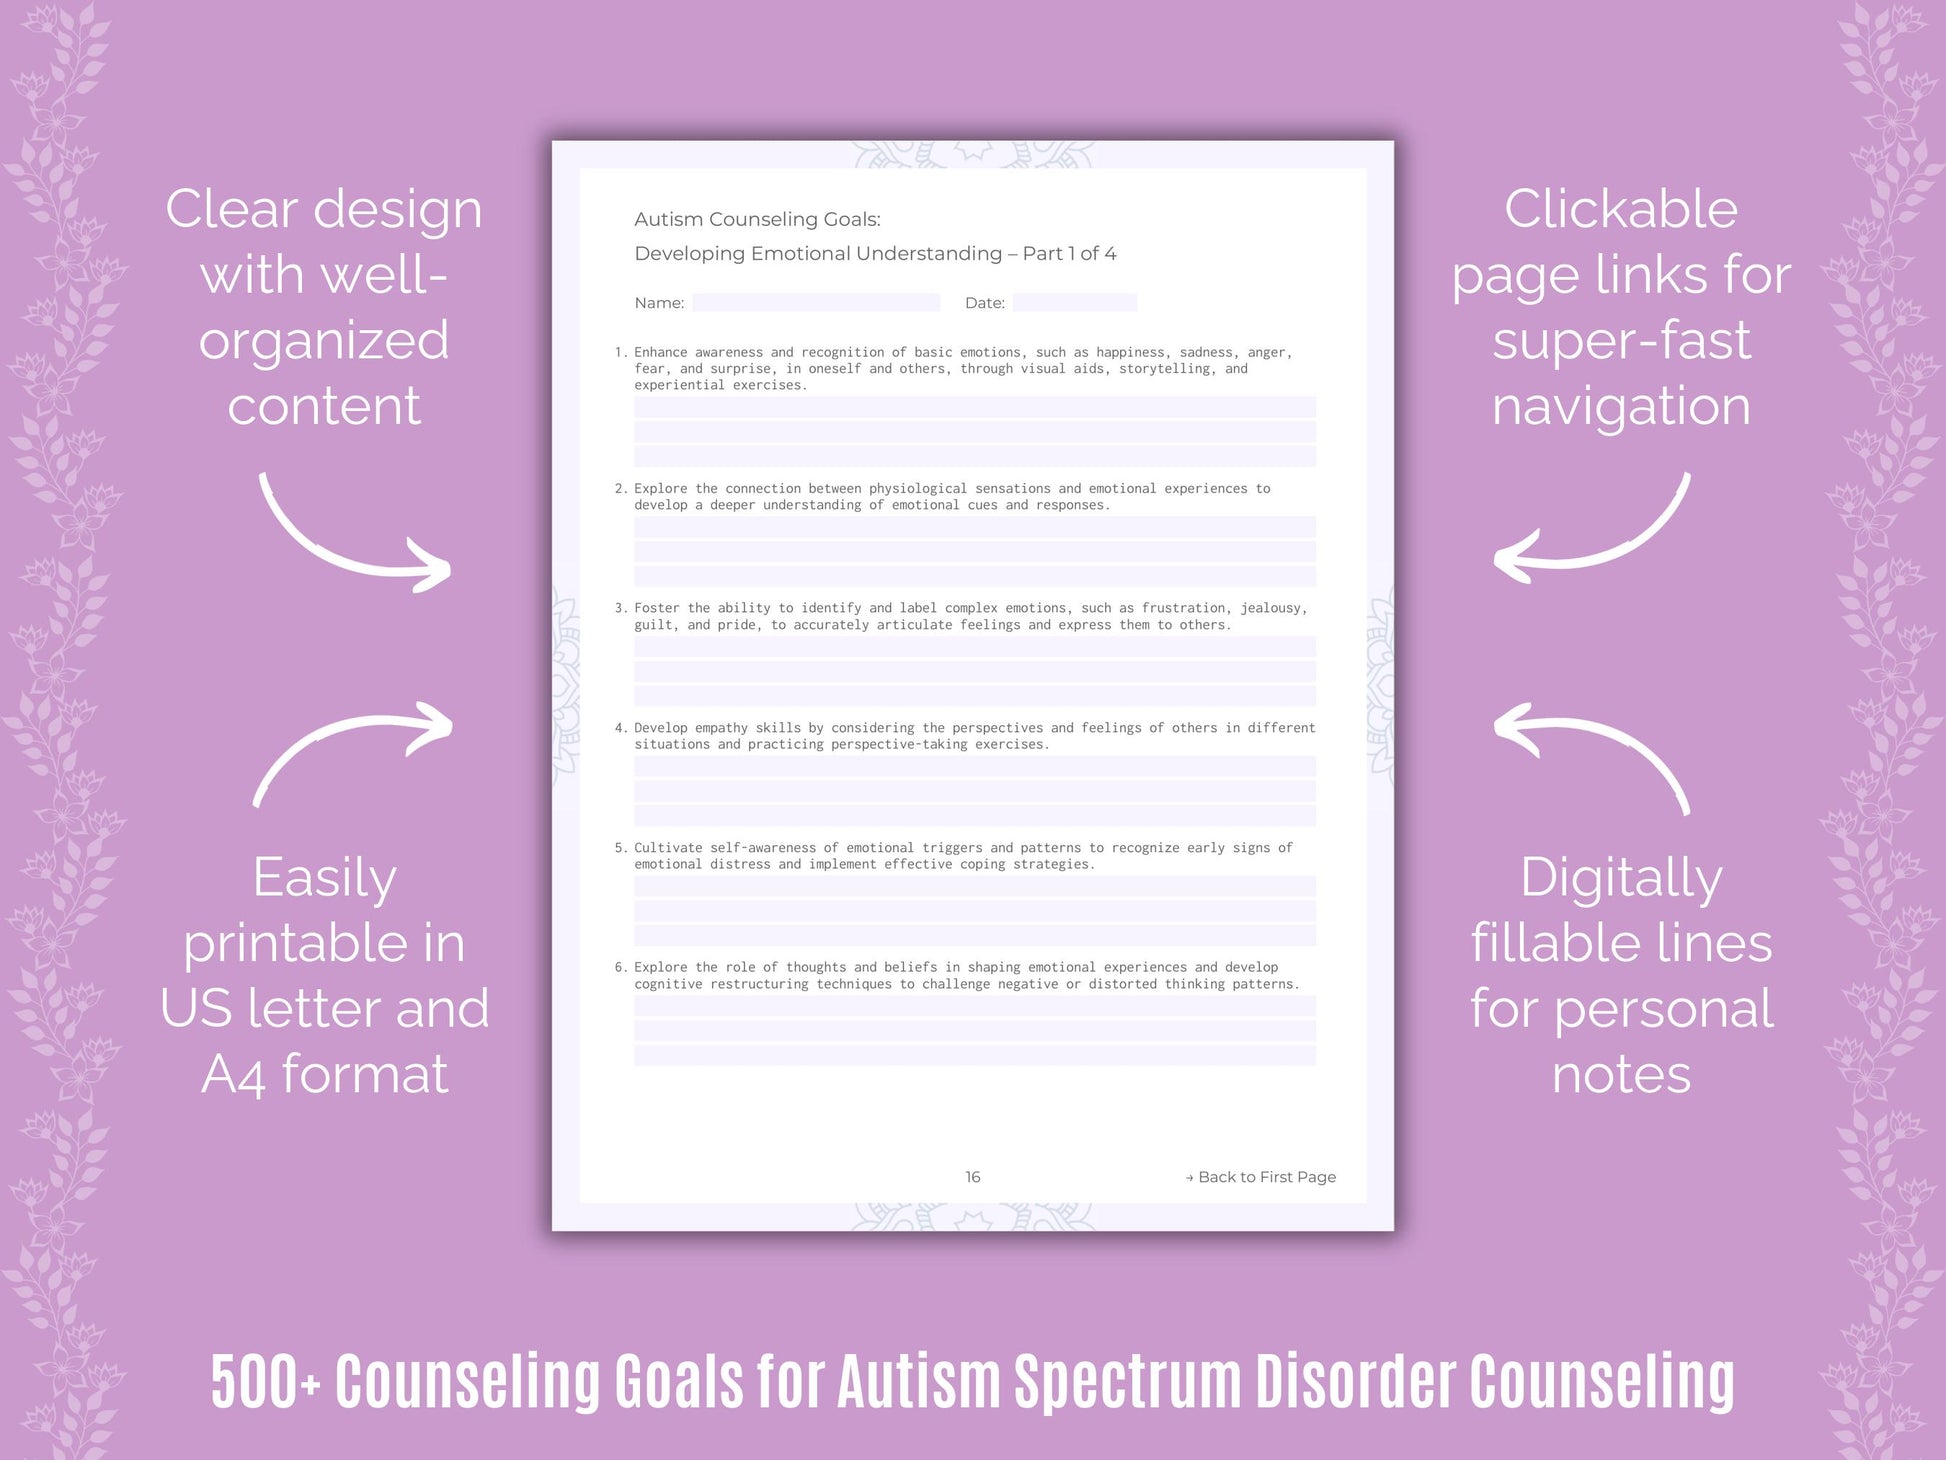 Autism Spectrum Disorder Counseling Goals Resource